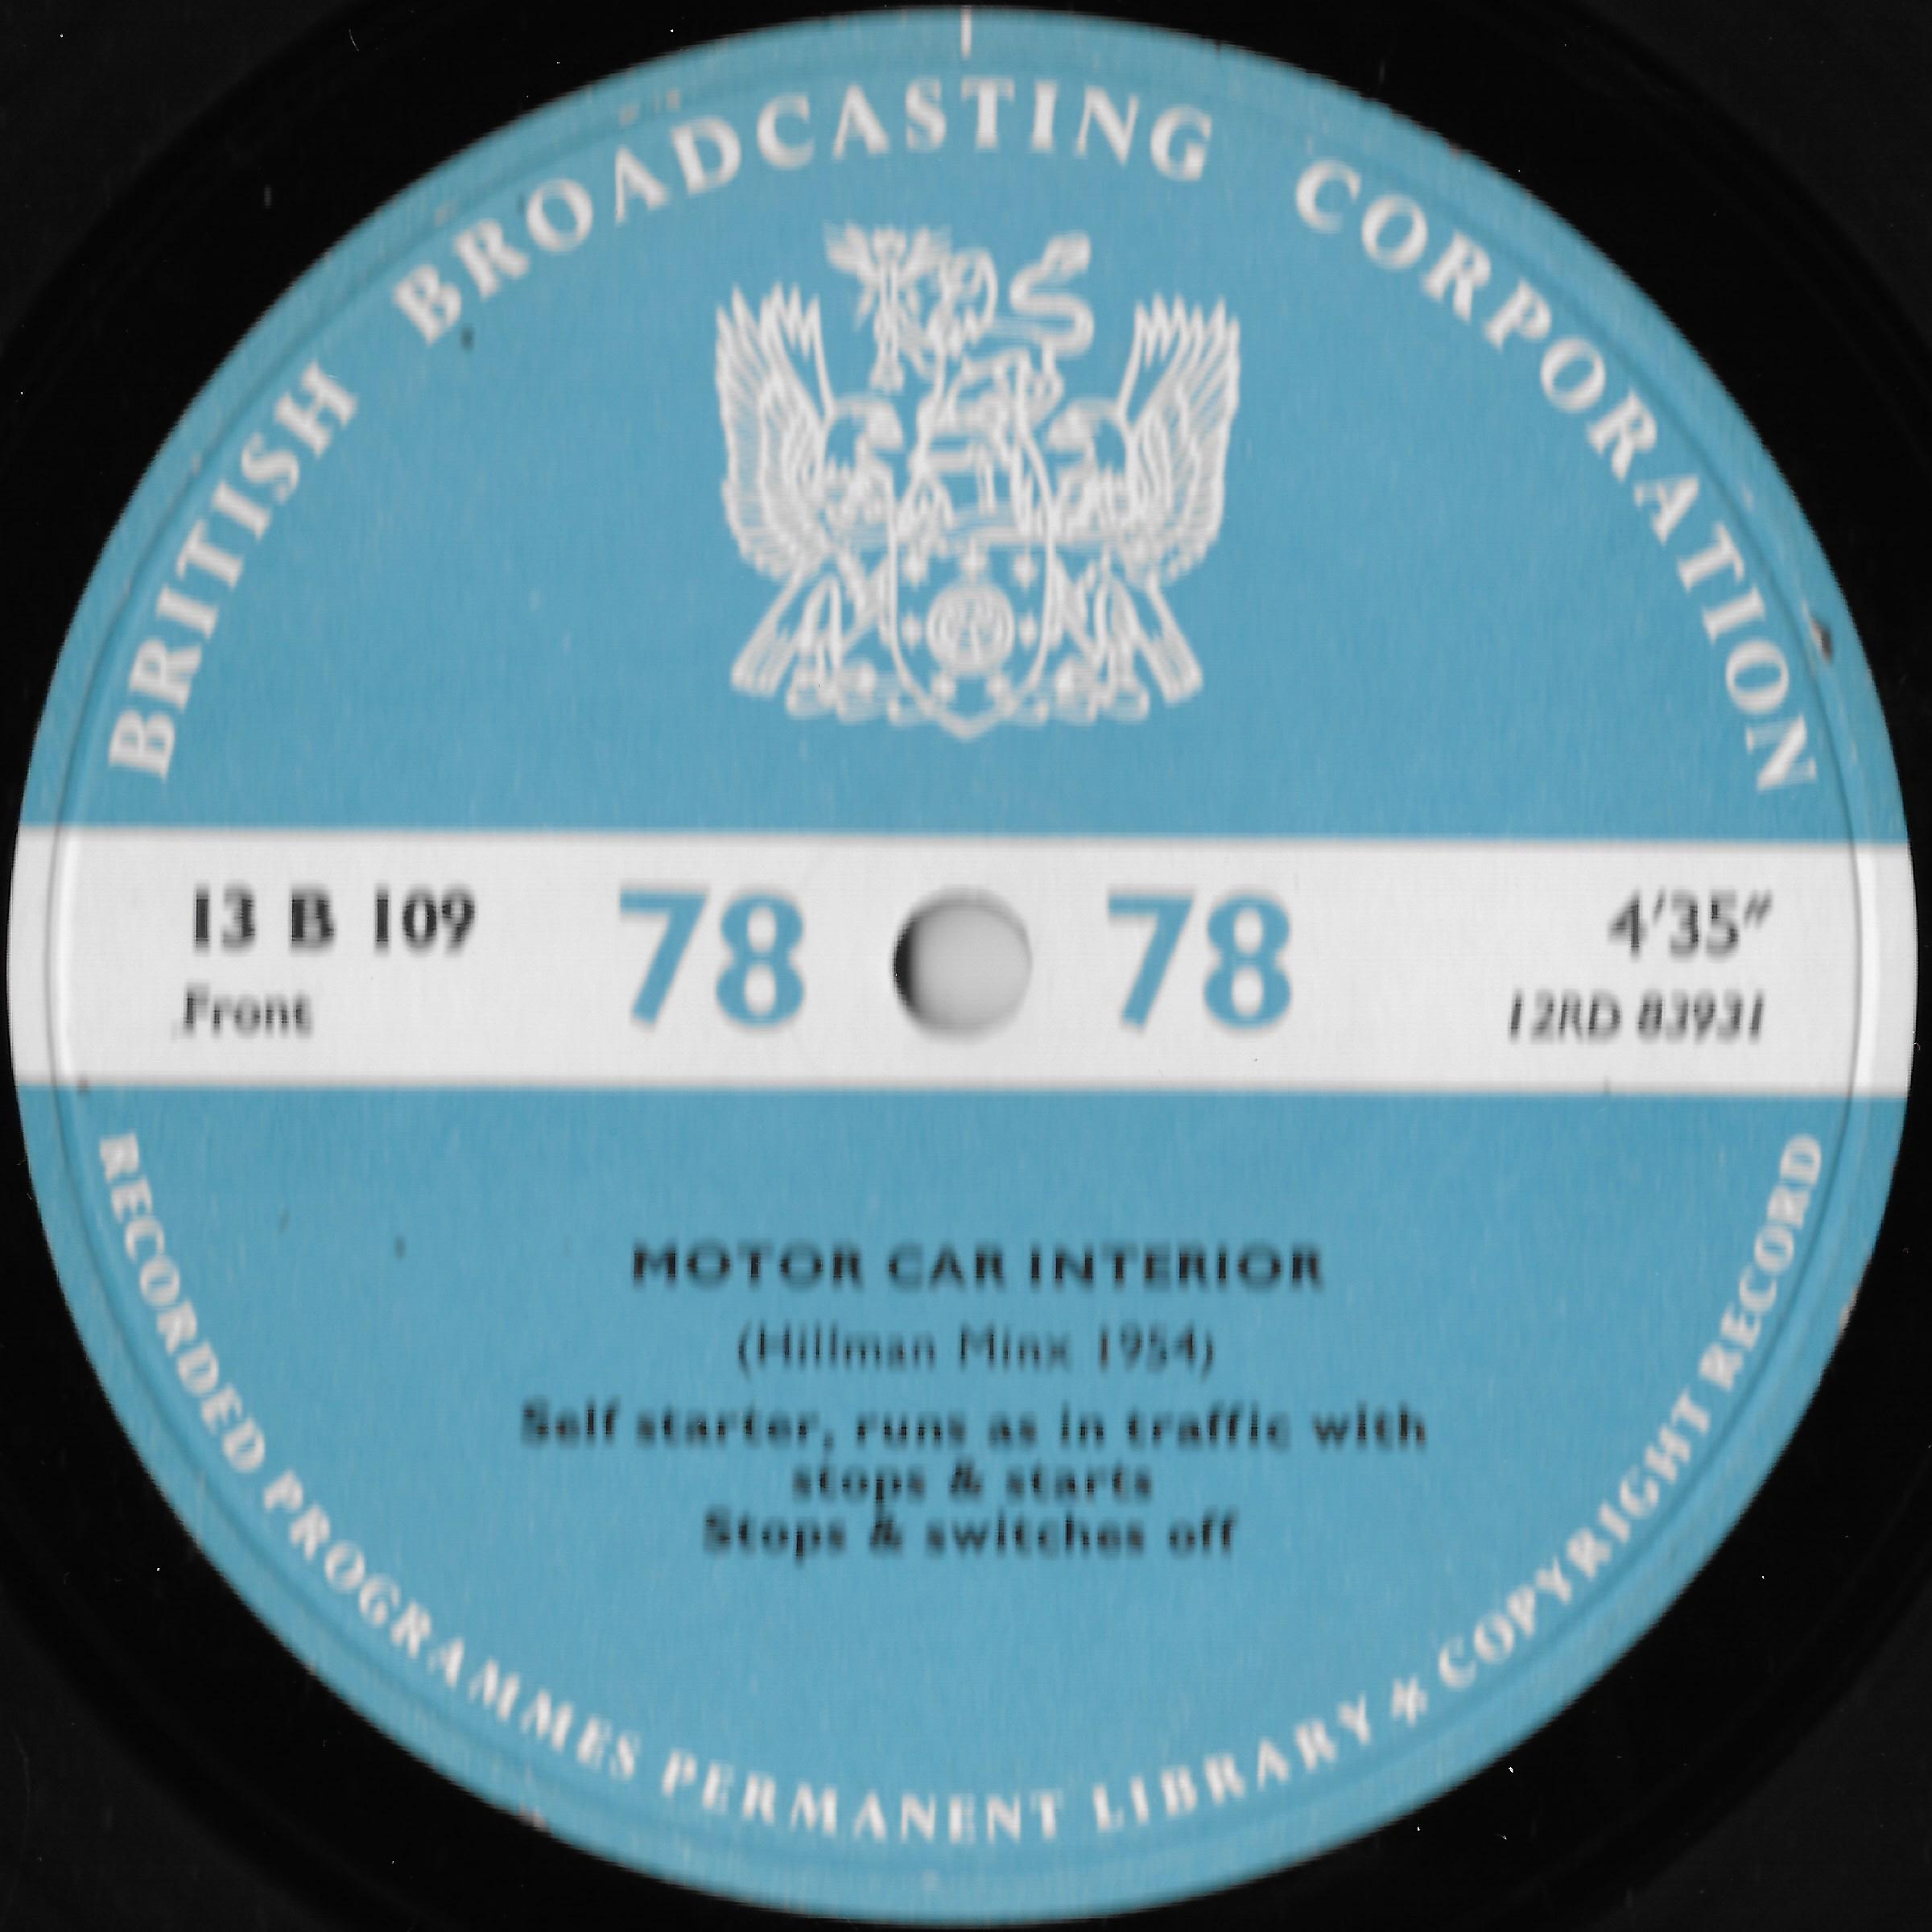 View 78's label picture &.